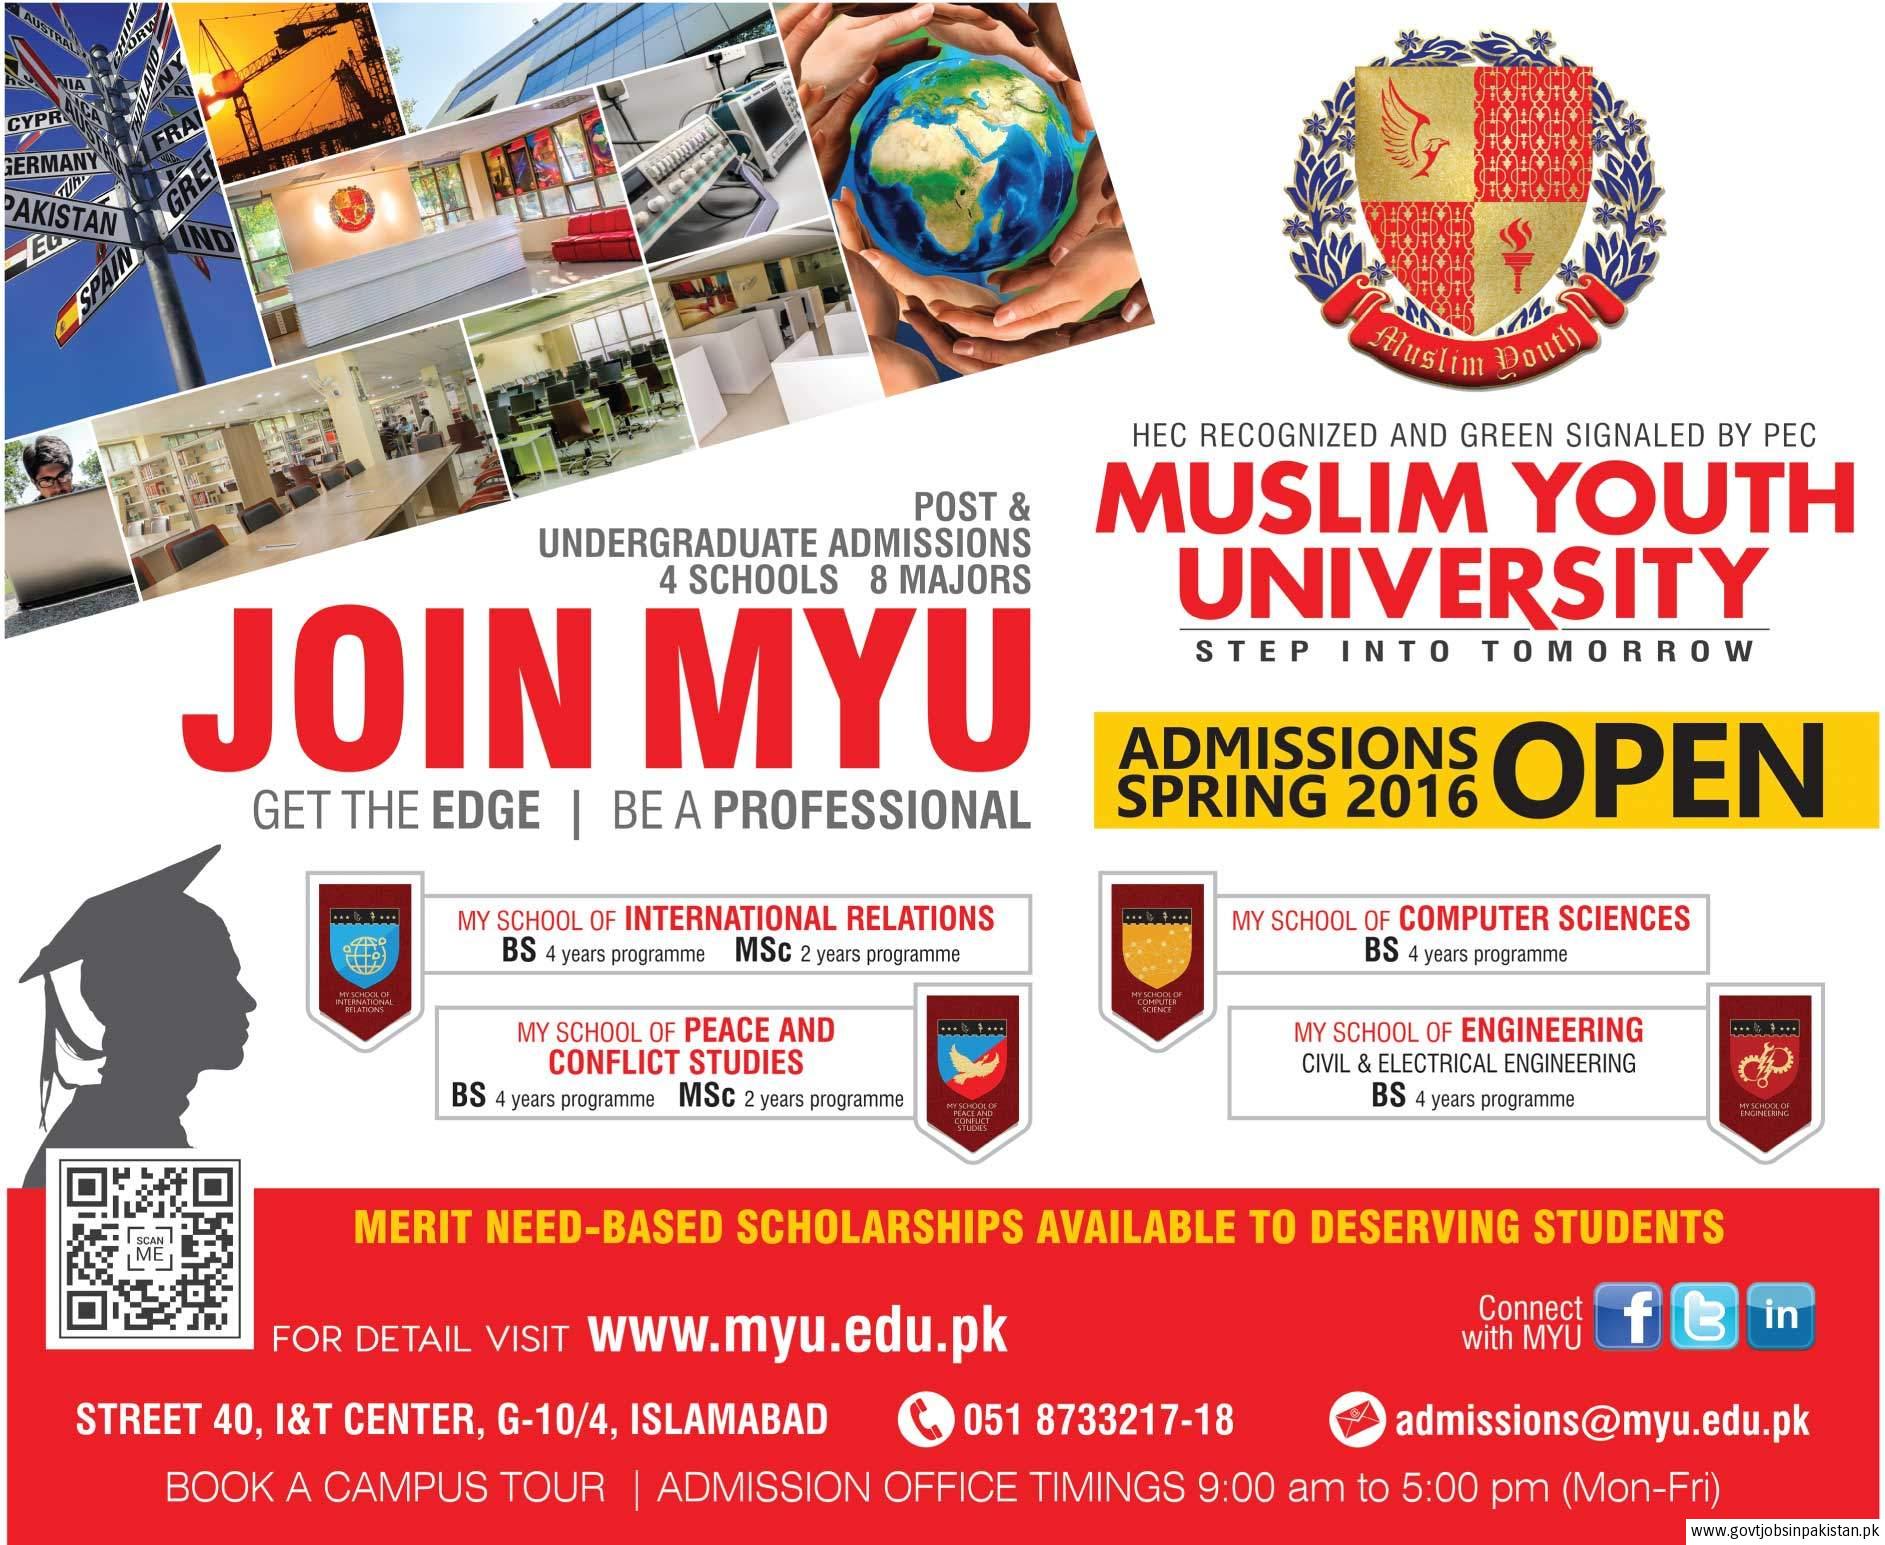 Join-MYU-Admission-Spring-2016-Open-Muslim-Youth-Univerity-Need-Based-Scholarships.jpg